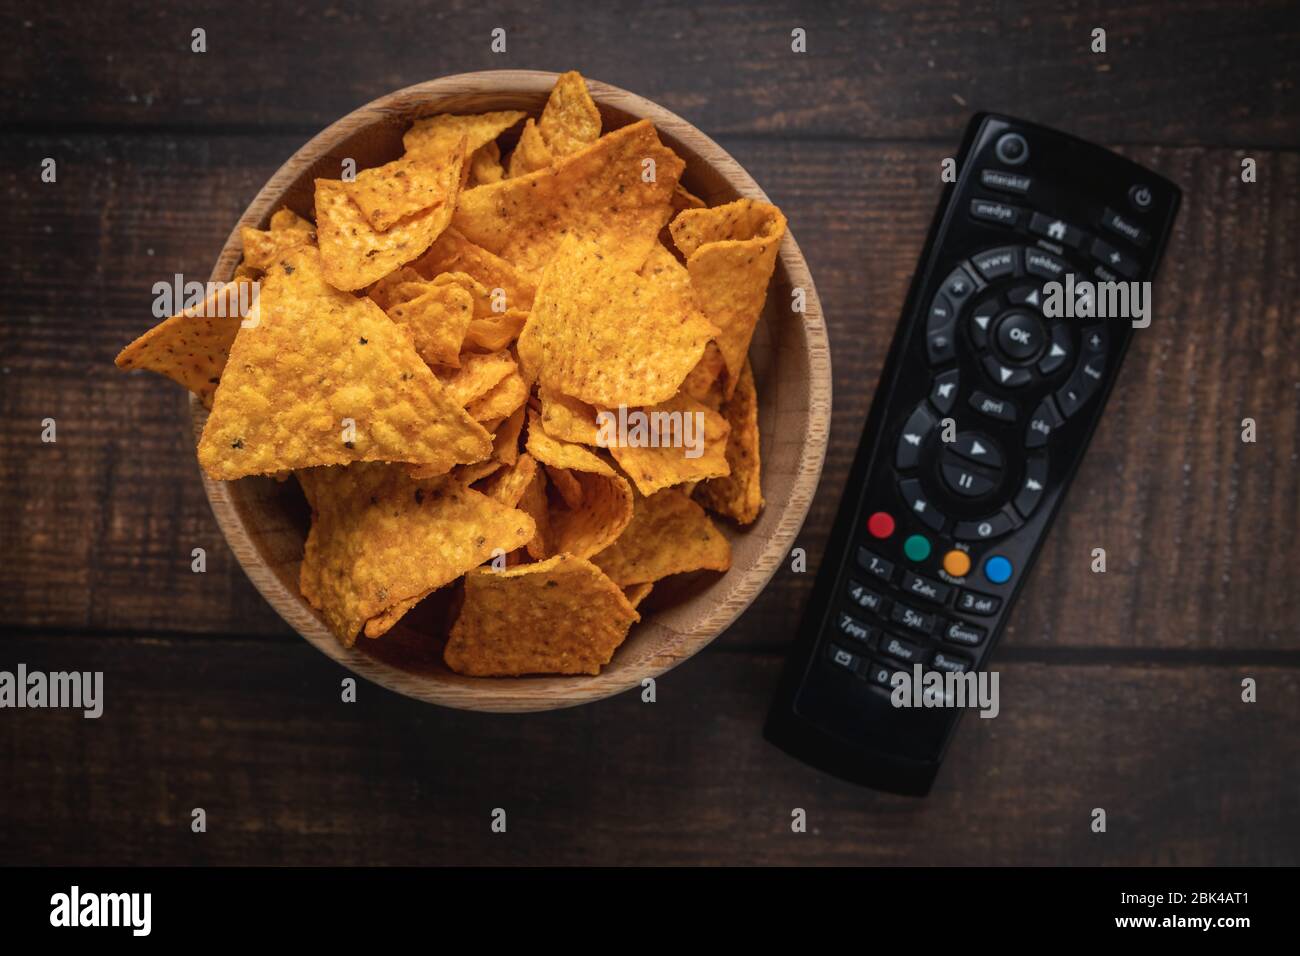 Chips in a wooden bowl next to the TV remote control against a burnt wooden background. Top view. Close up. Toned. Stock Photo